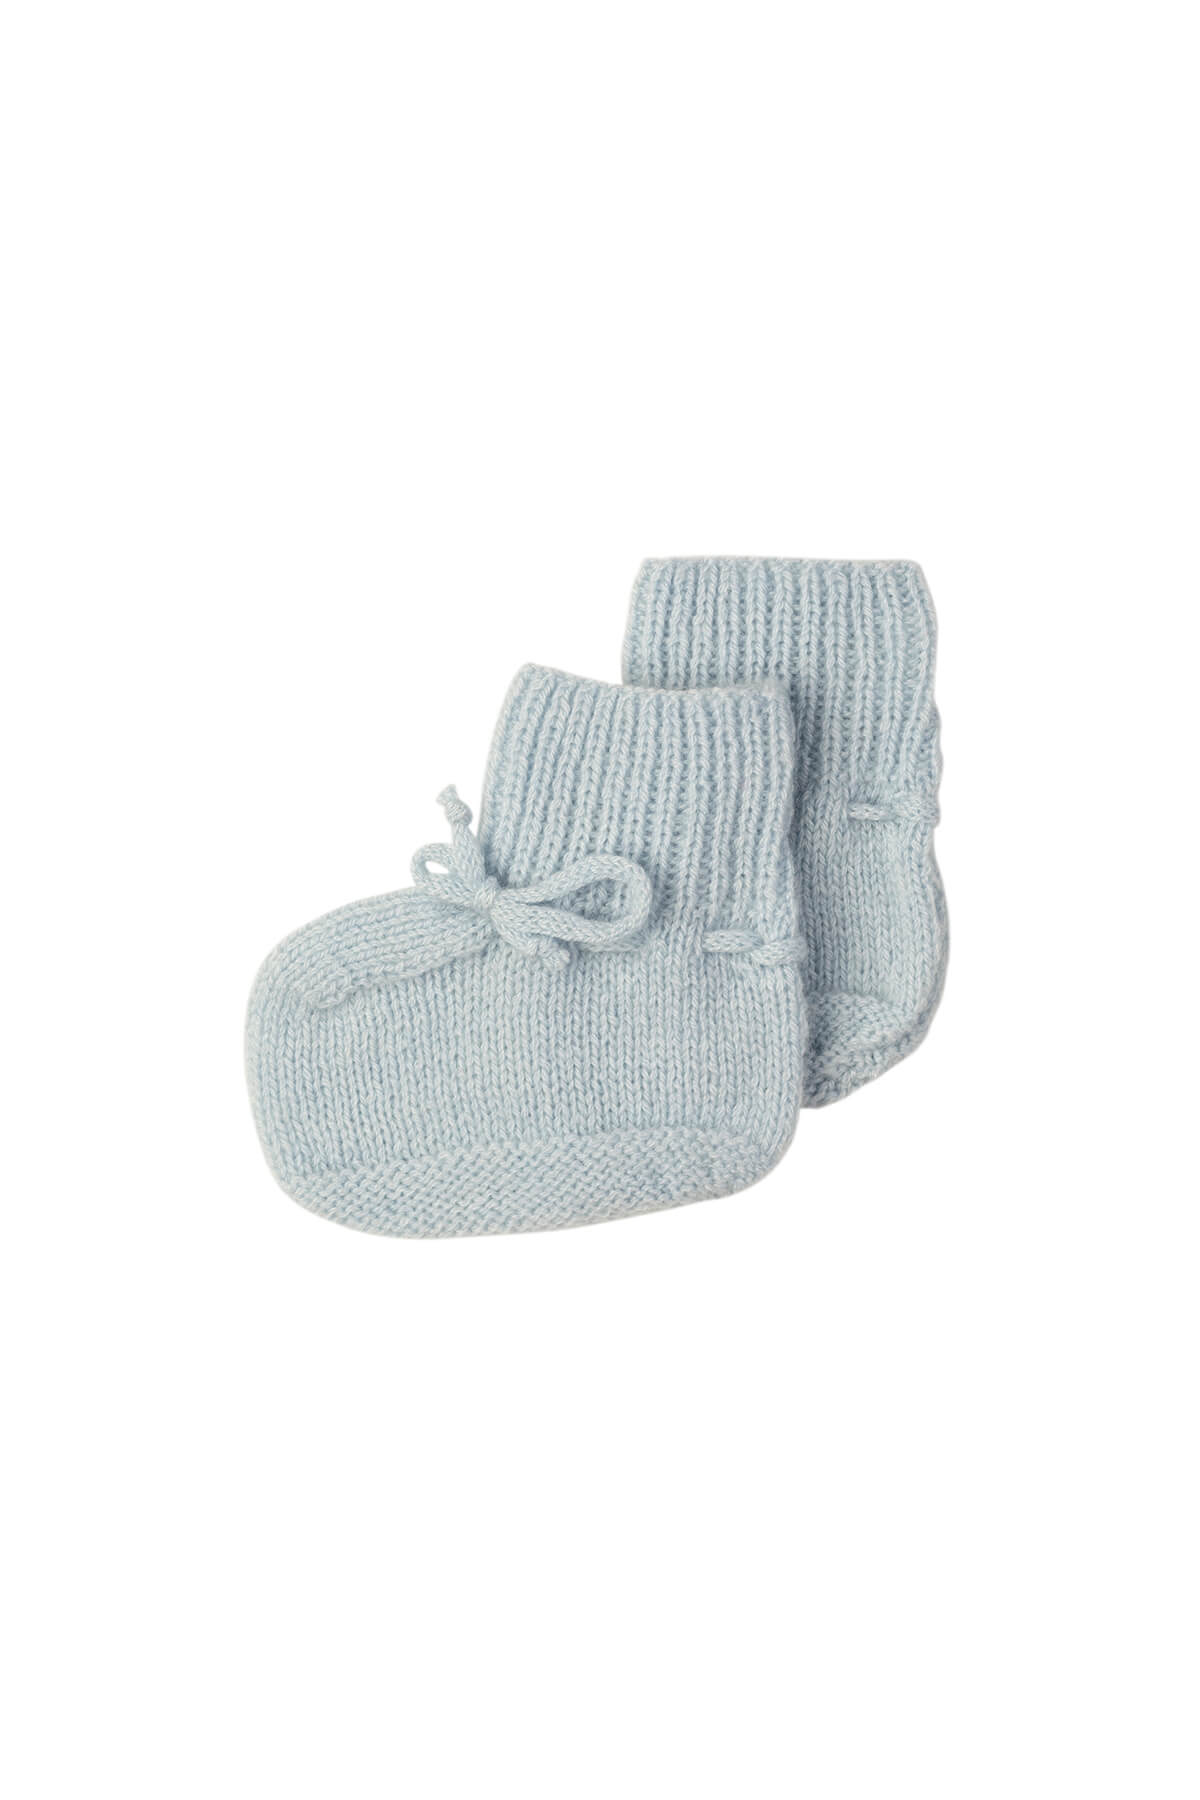 Johnstons of Elgin’s Baby's 1st Cashmere Accessories Gift Set with Powder Blue Cashmere Baby Booties on a white background AW21GIFTSET20C